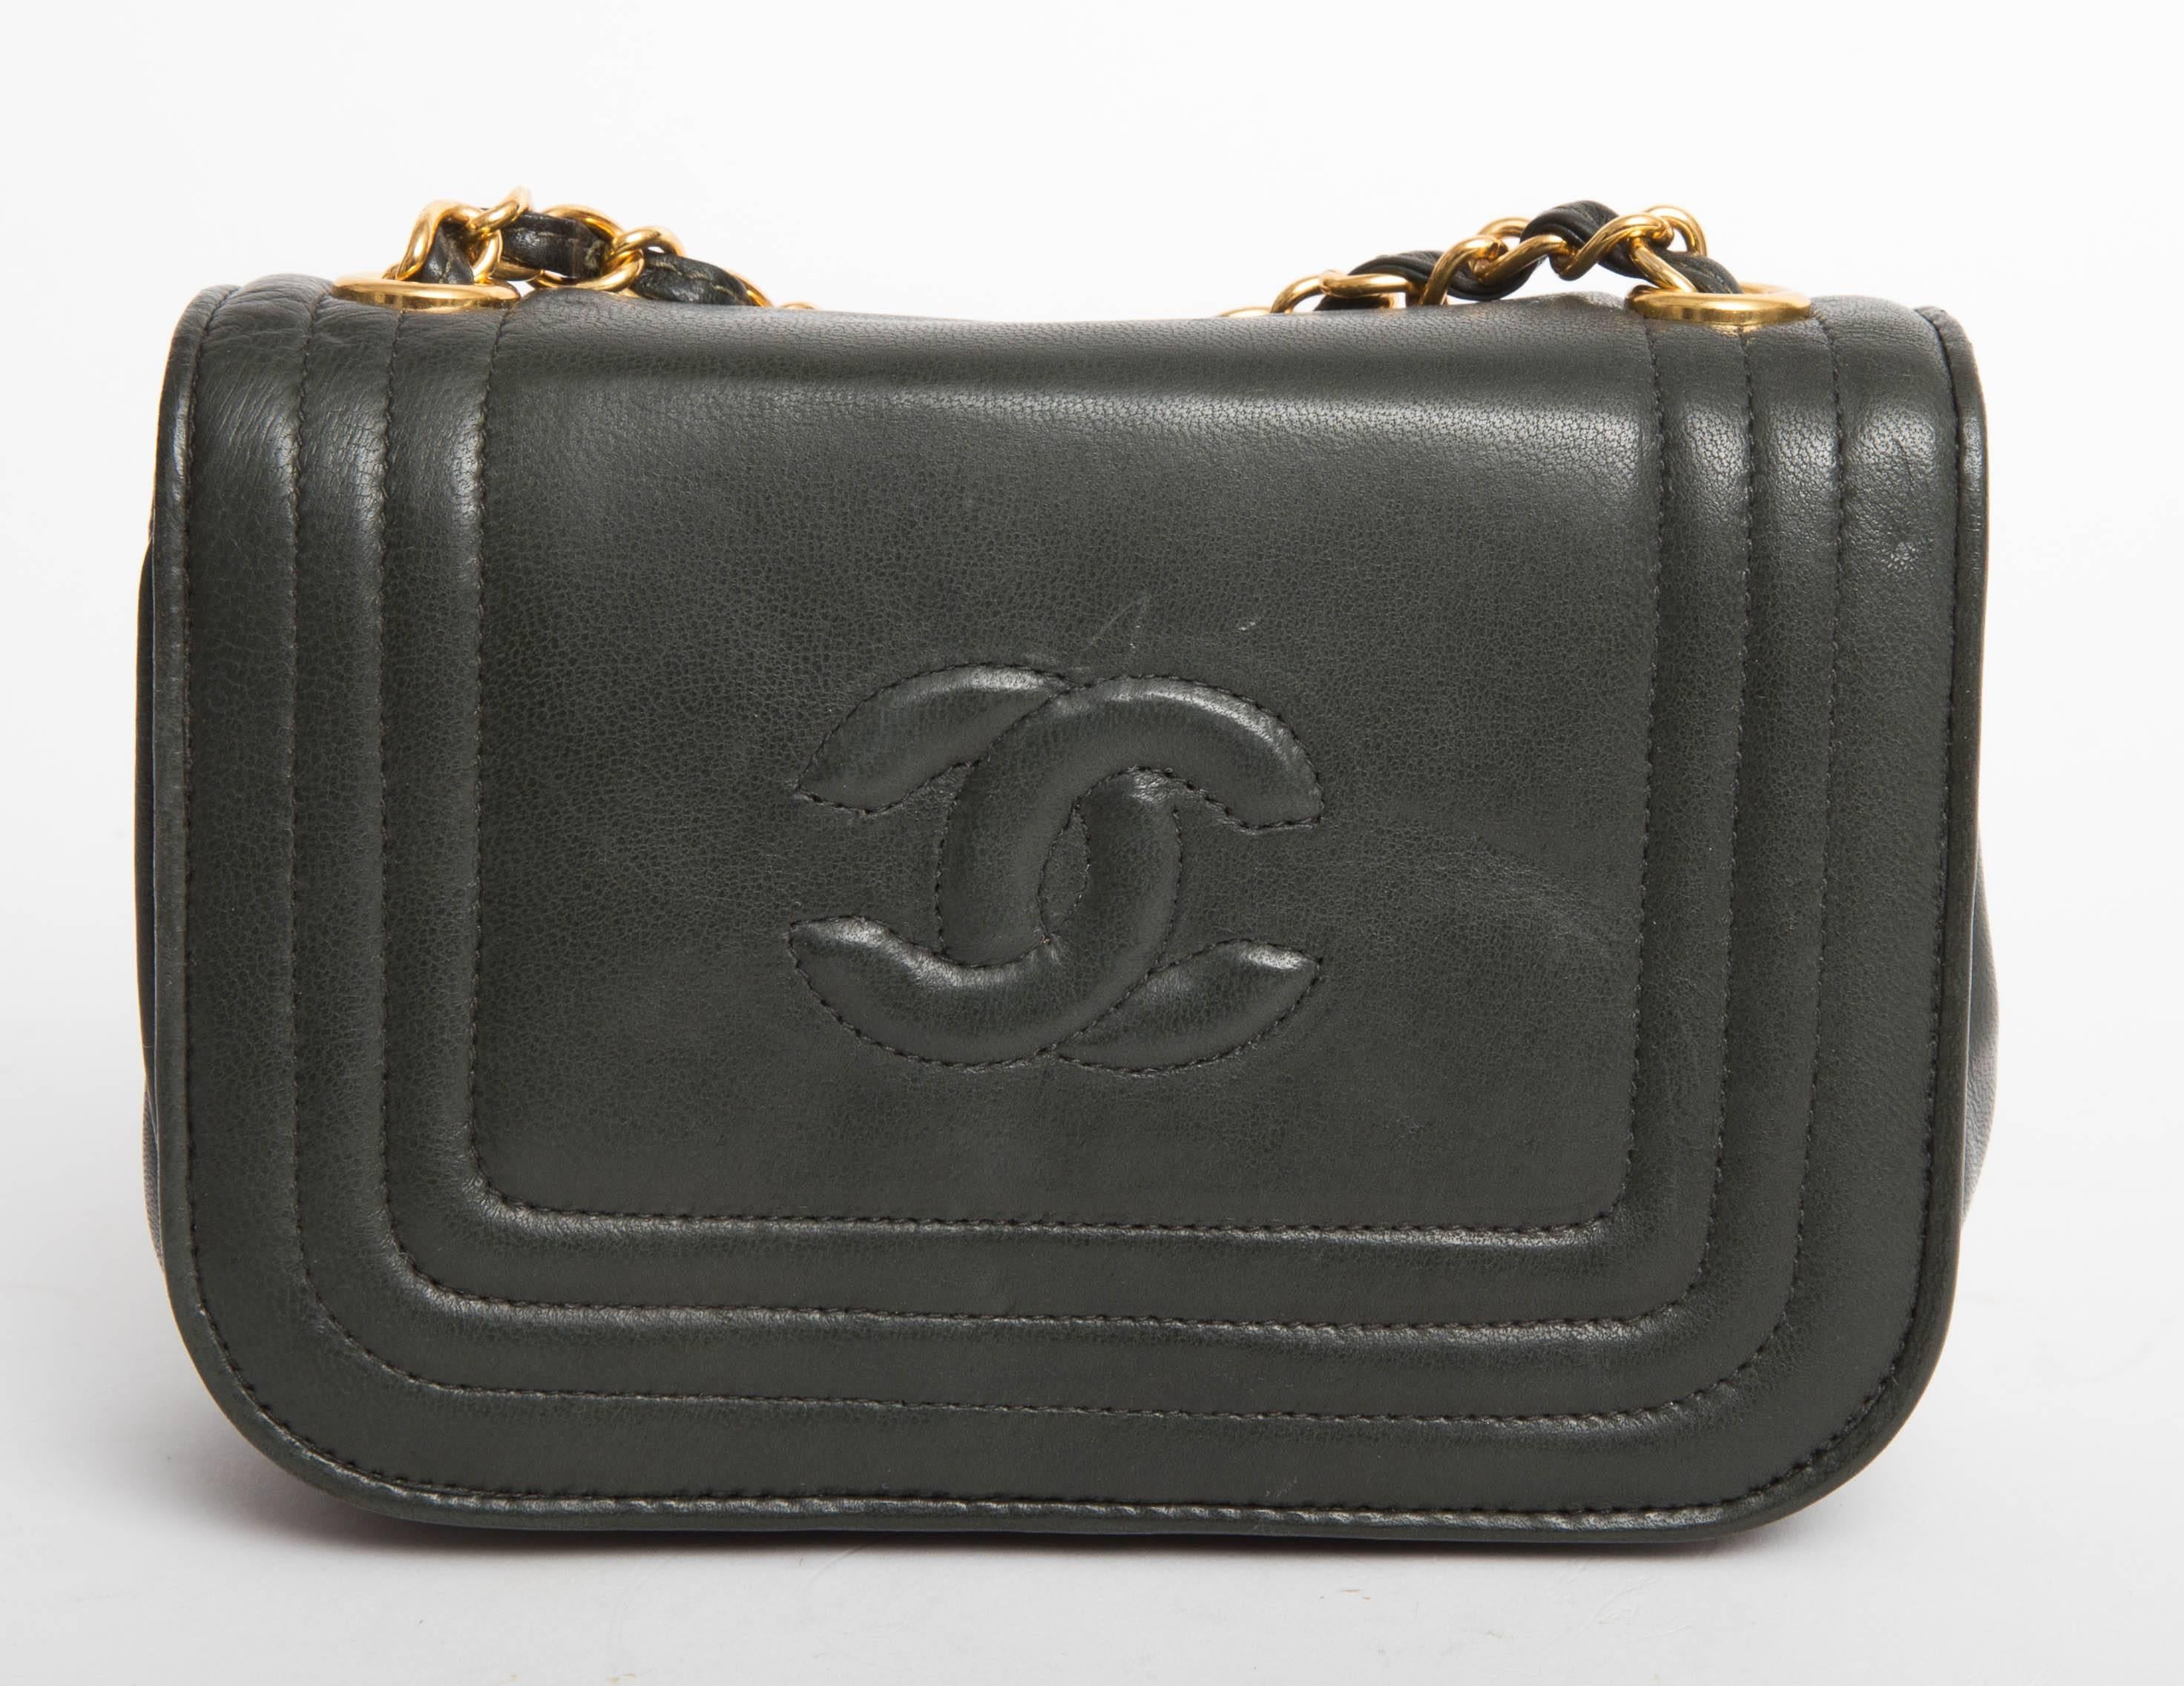 Incredibly Chic Chanel Vintage Dark Green Lambskin Single Flap Classic with Gold Tone Hardware
Strap drop 18 inches.
Comes with original duster, authenticity card and intact hologram.
Authenticity card no 0662182 denotes the years 2000 -